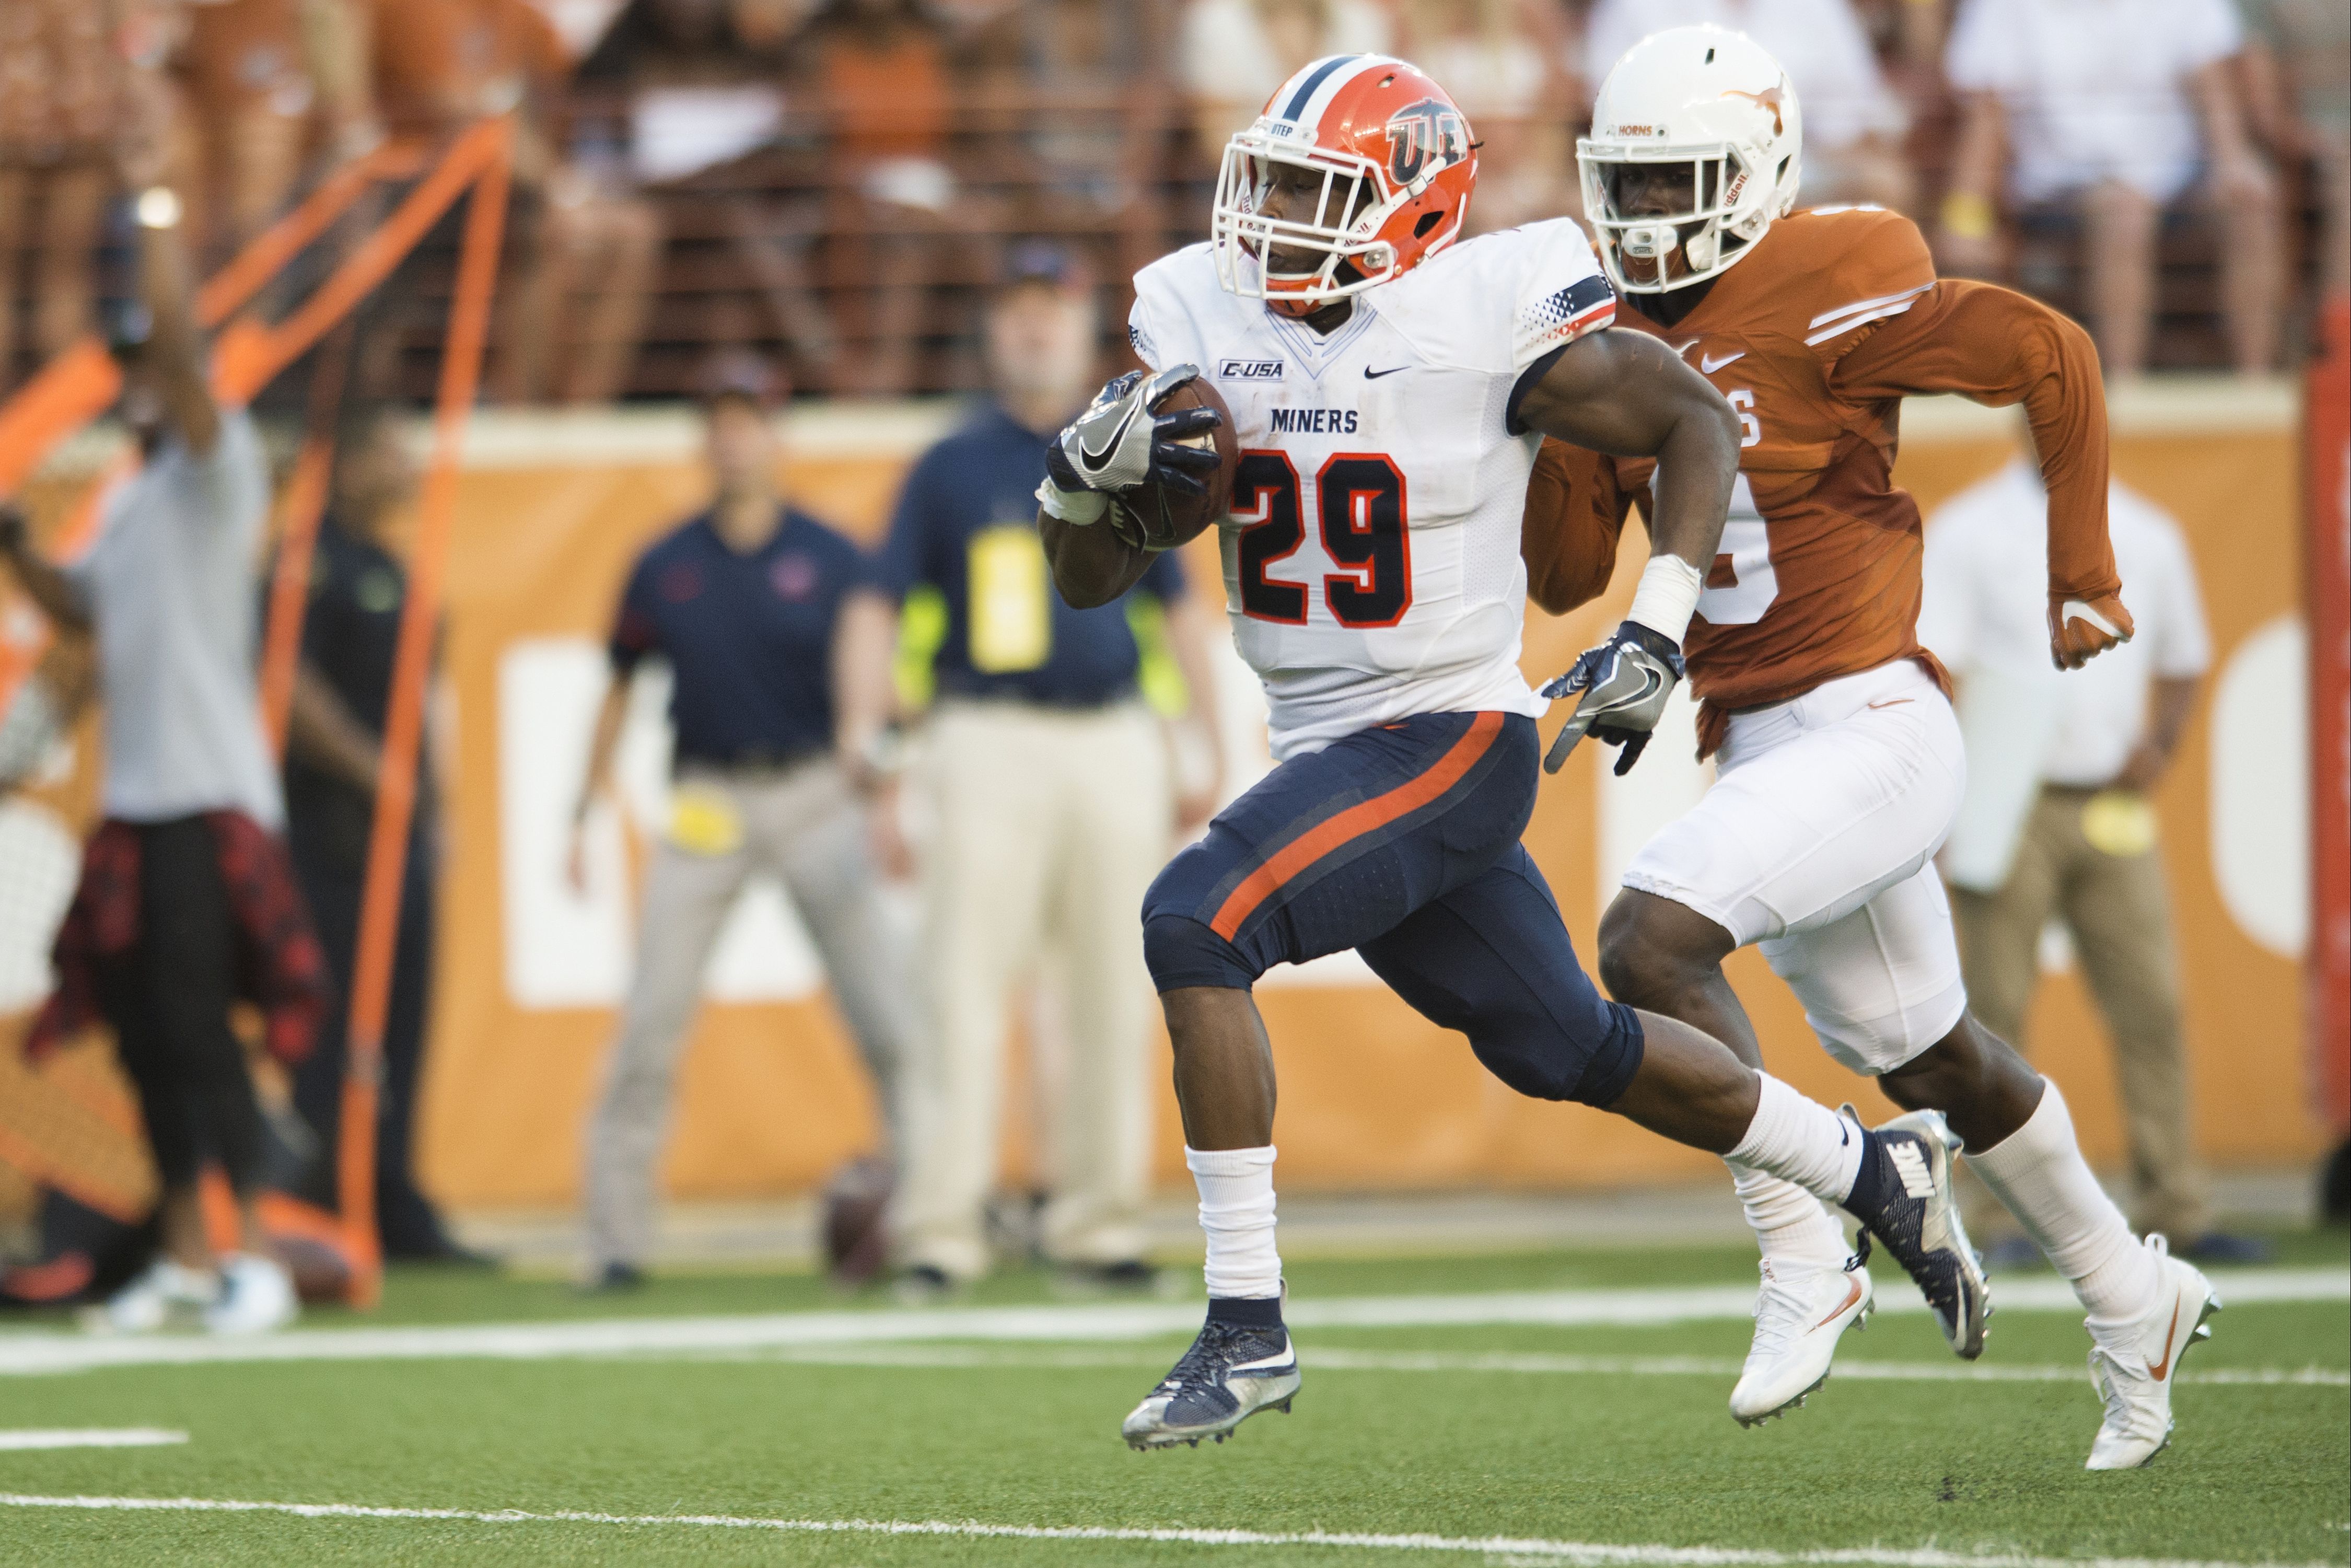 NFL Draft interview: UTEP RB Aaron Jones on his NFL expectations